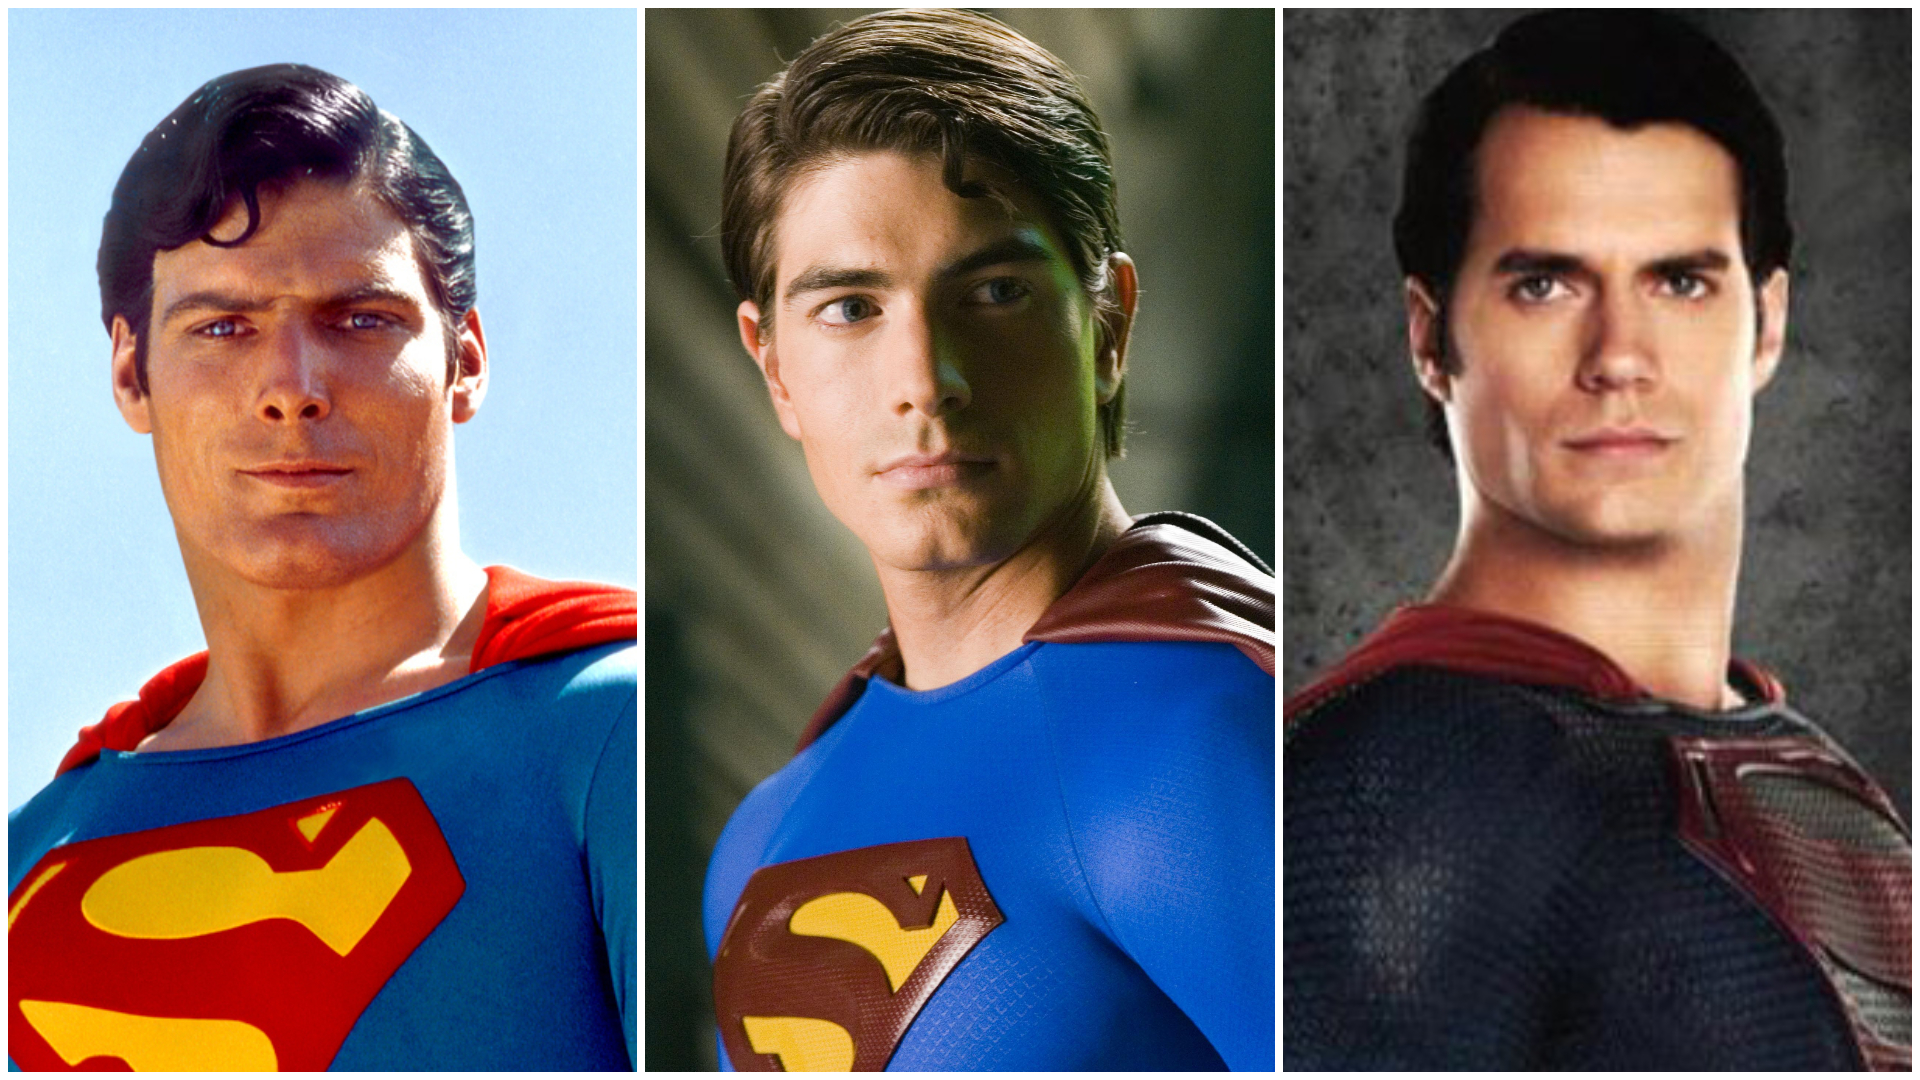 All Superman actors in the order they were casted